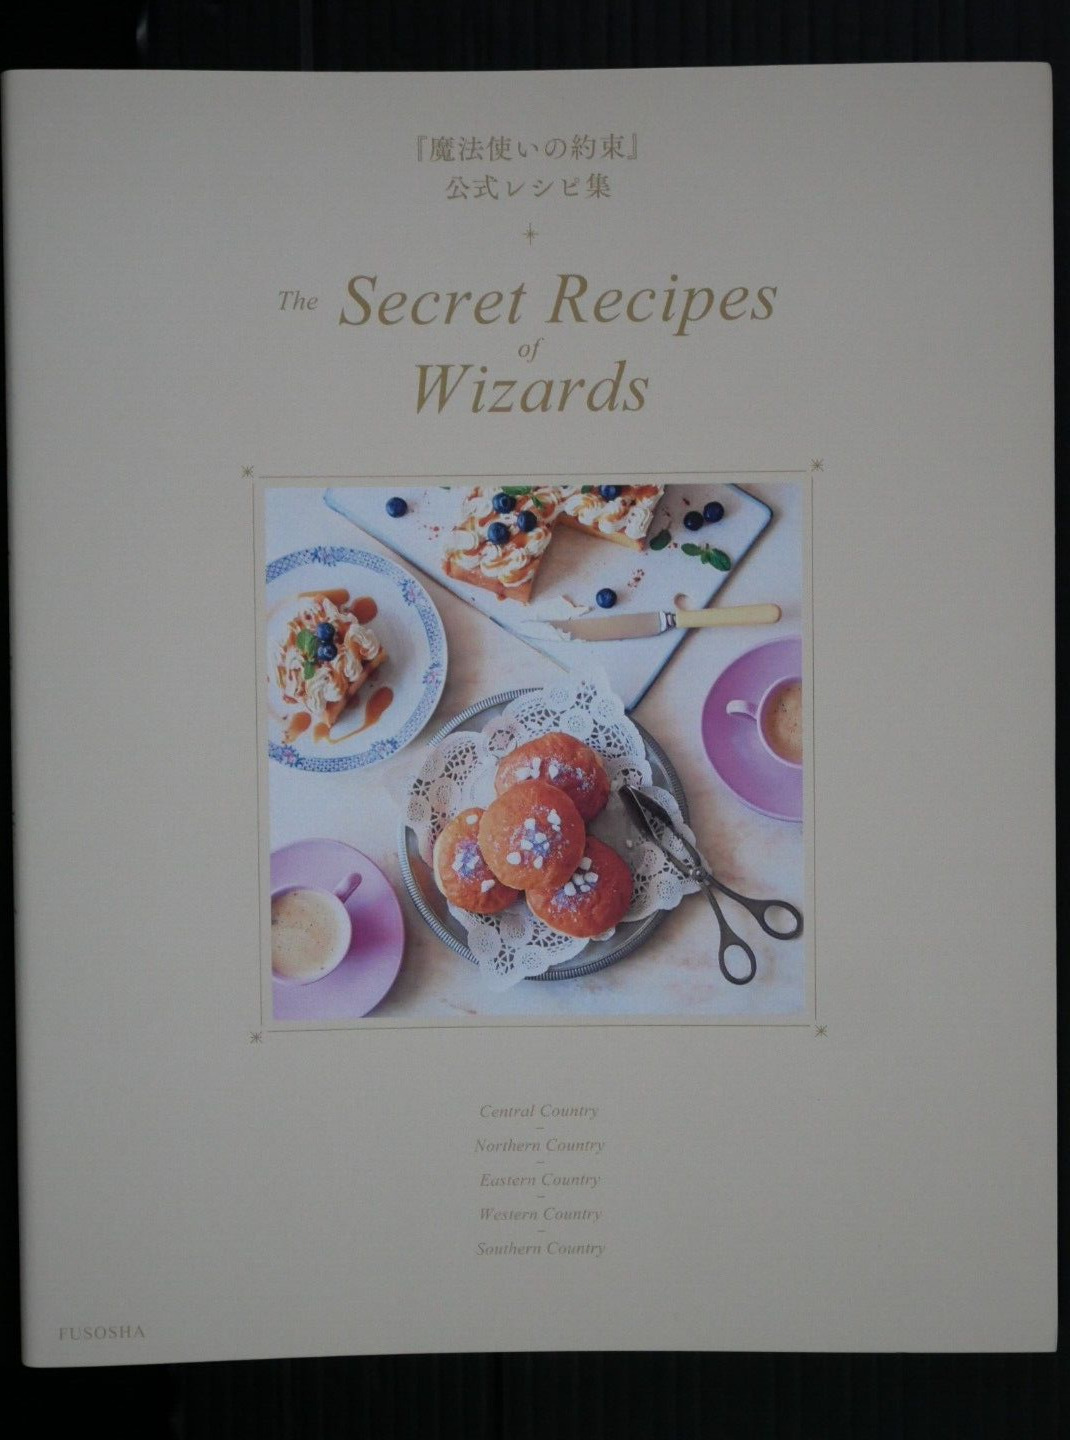 Promise of Wizard Official Recipe Book: The Secret Recipes of Wizards - JAPAN